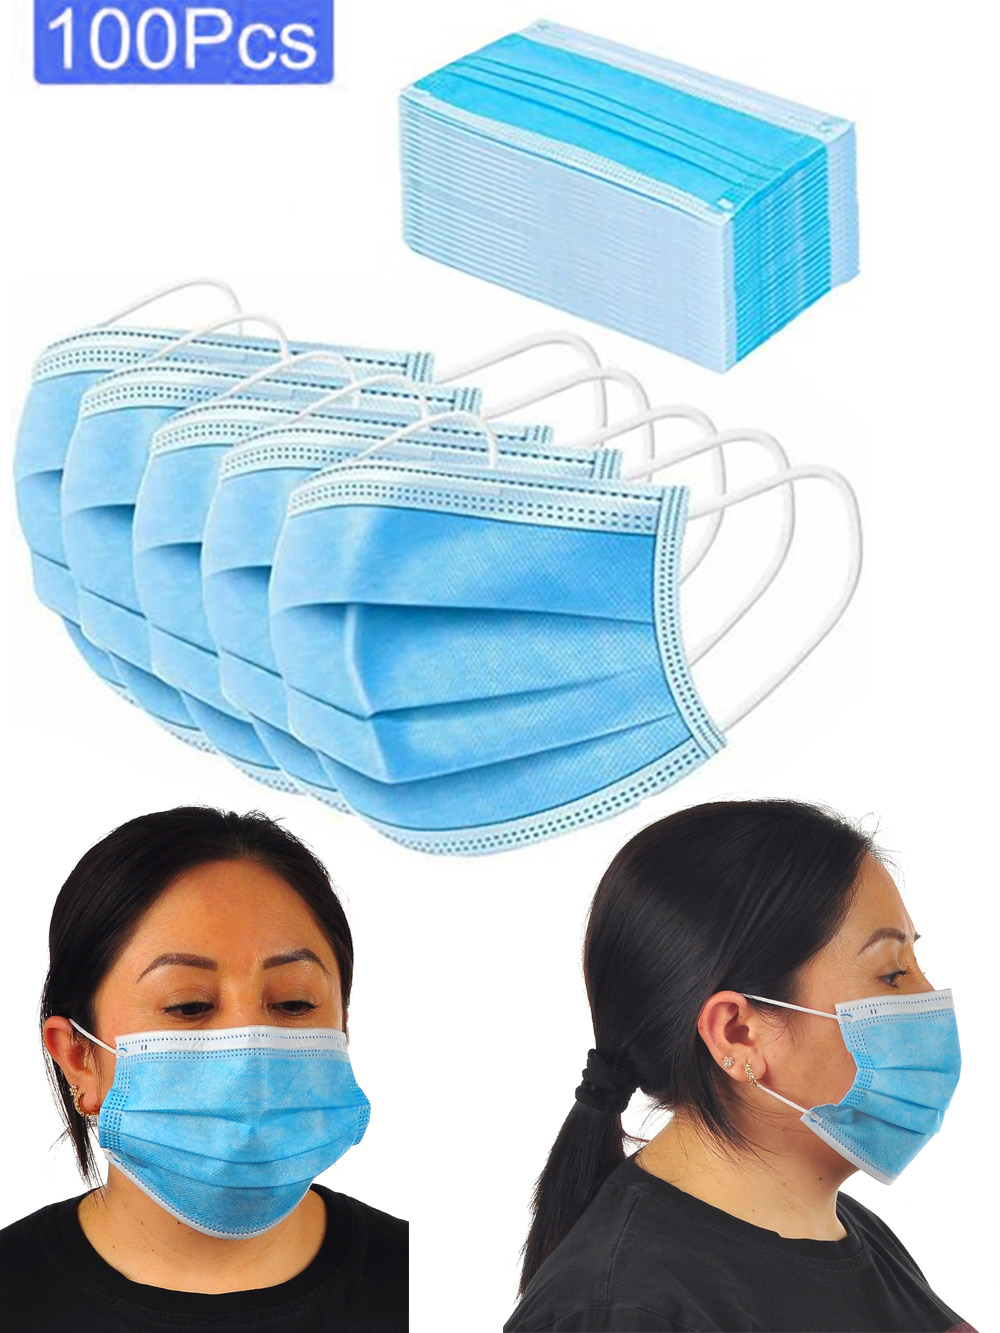 Disposable Face Mouth Mask 3-Ply Ear Loop - image 1 of 3